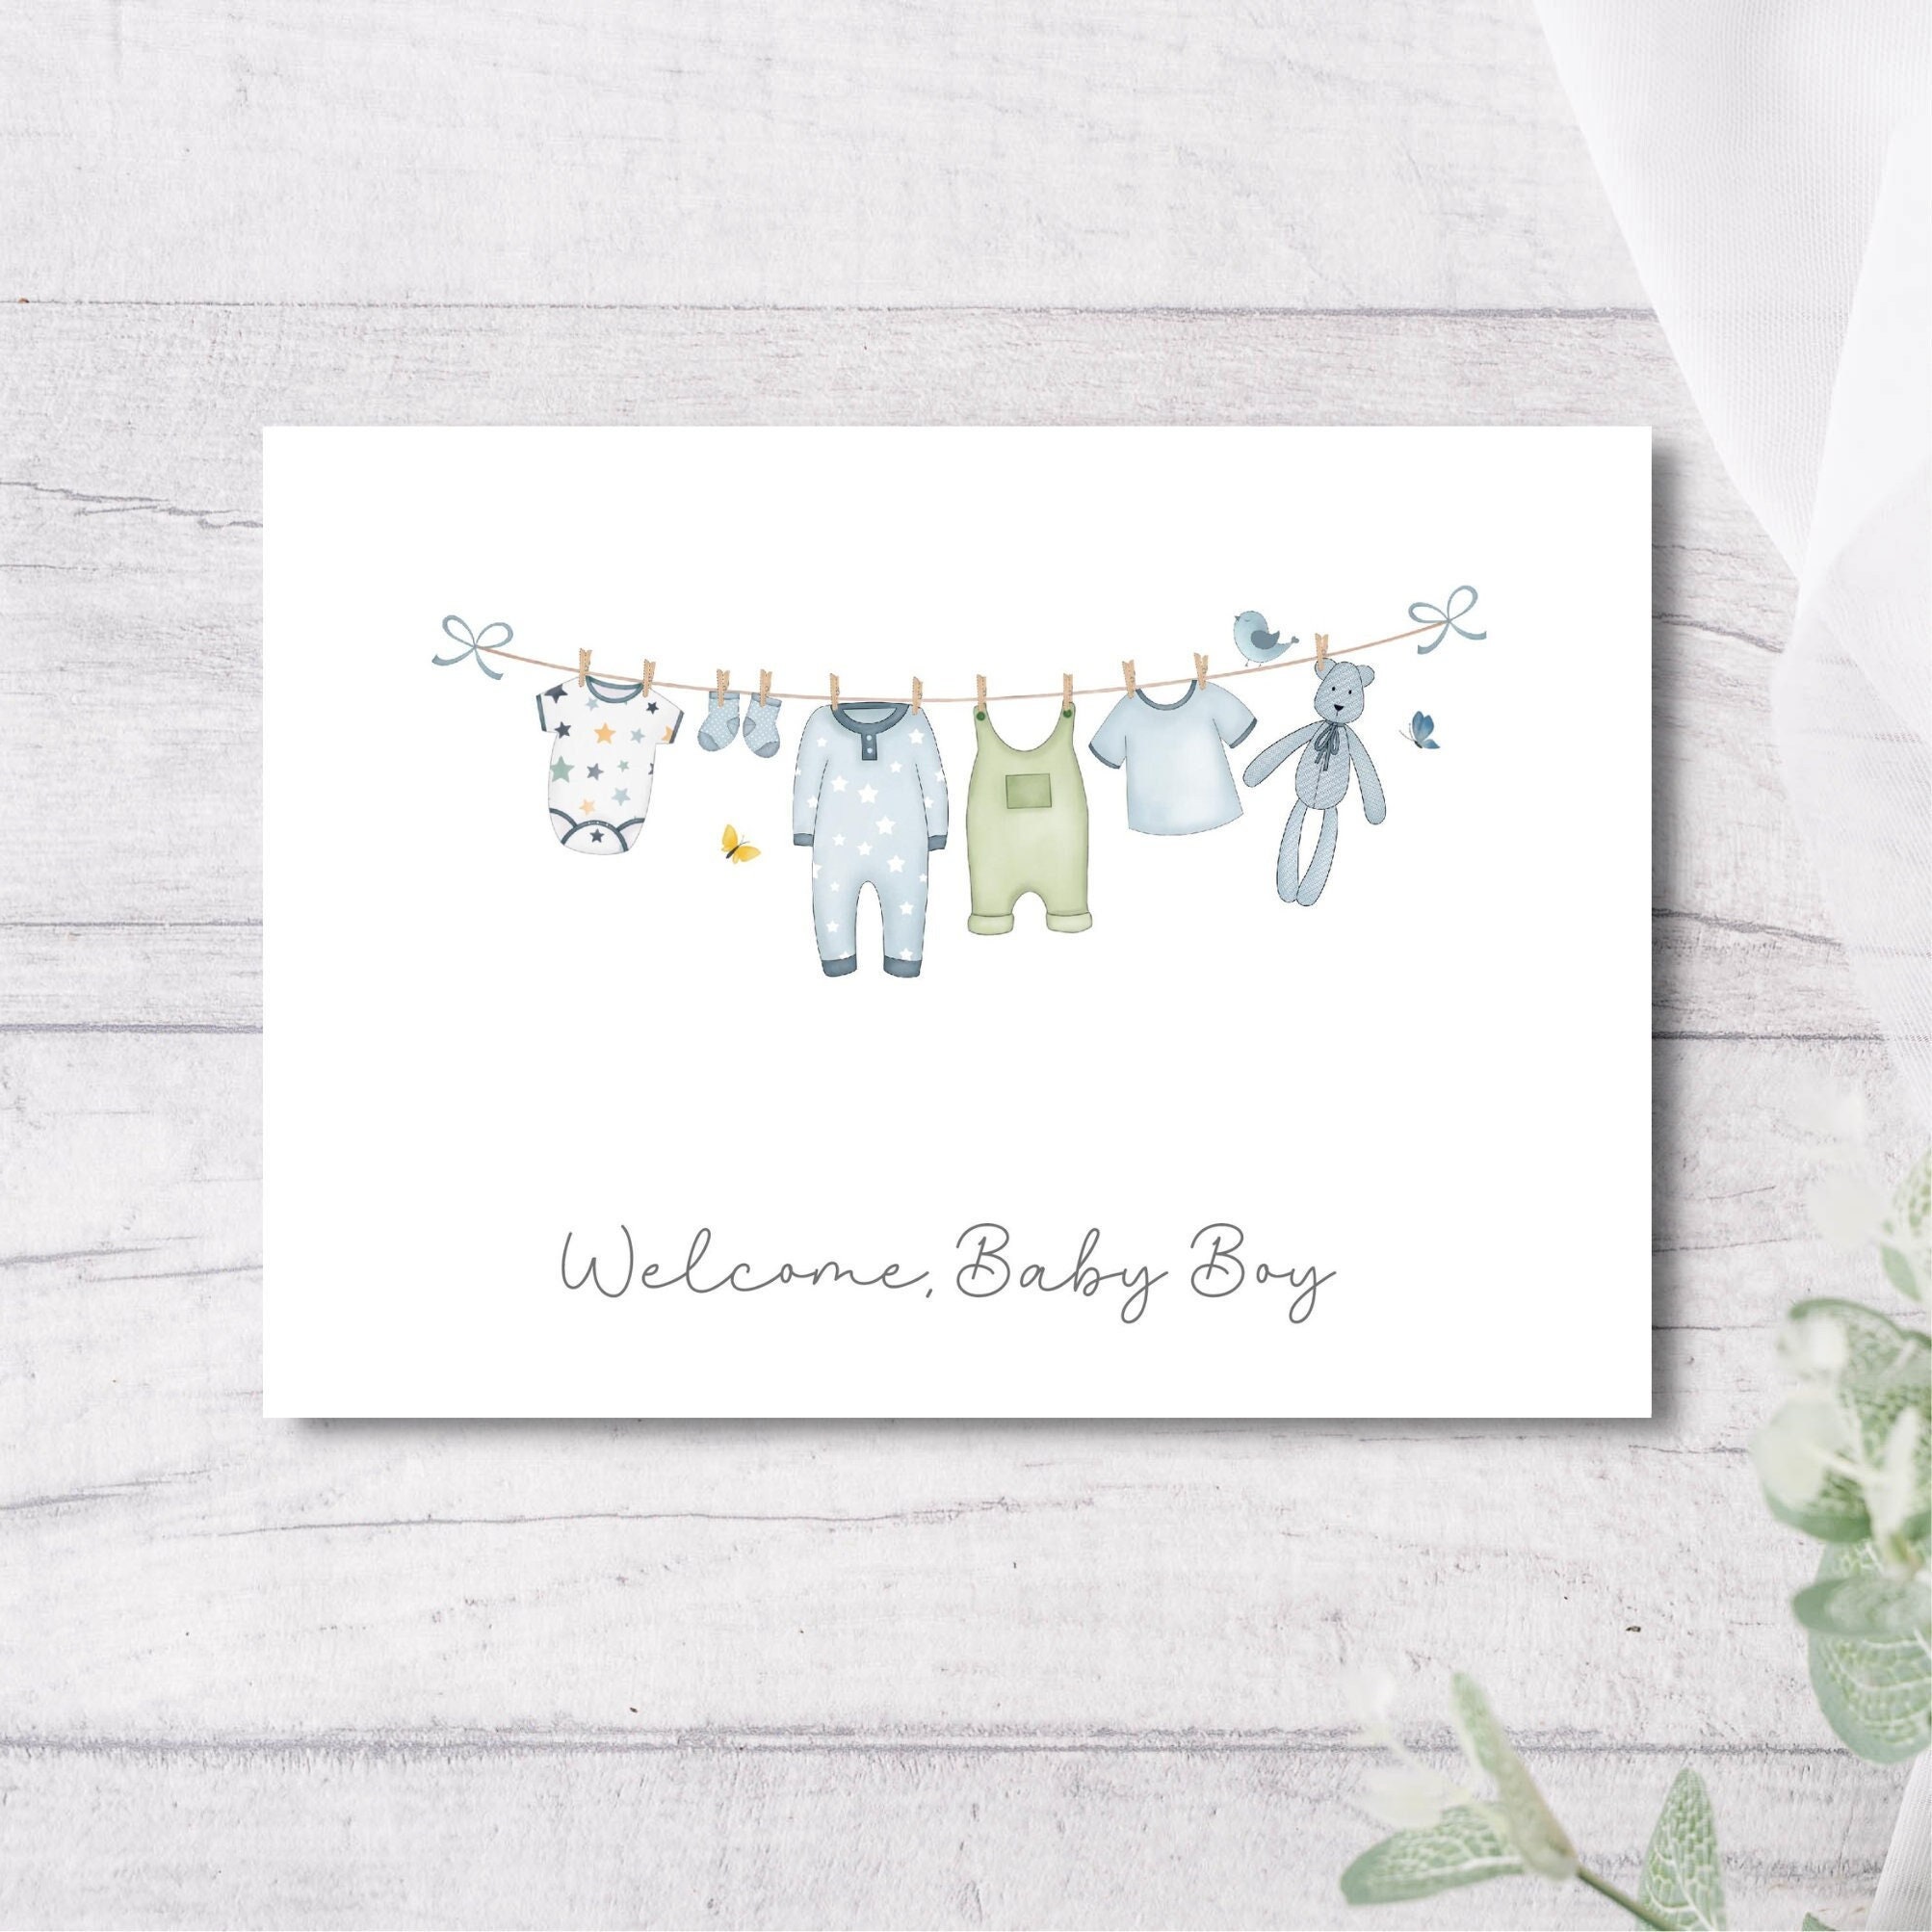 You Had Sex PRINTABLE Greeting Card, 5x7, Cardstock, Baby Carriage,  Pregnancy, Expecting, New Baby, Parents, Congratulations, Boy, Girl 